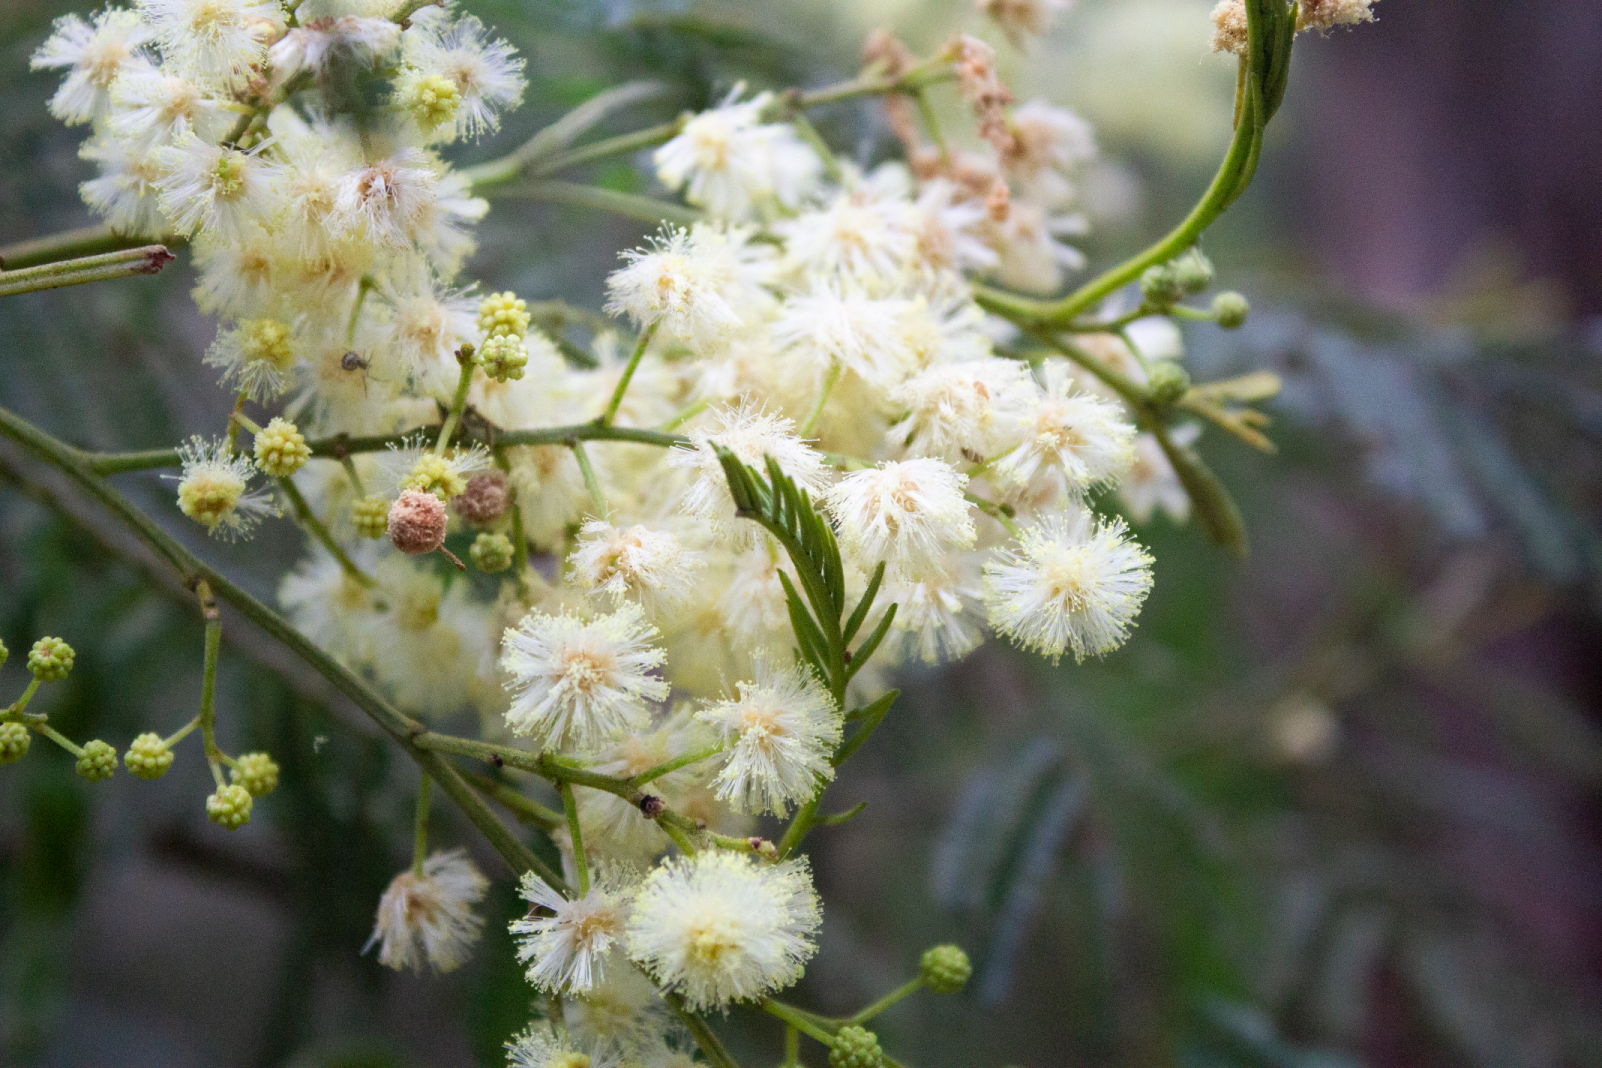 A close up of yellow-white wattle flowers